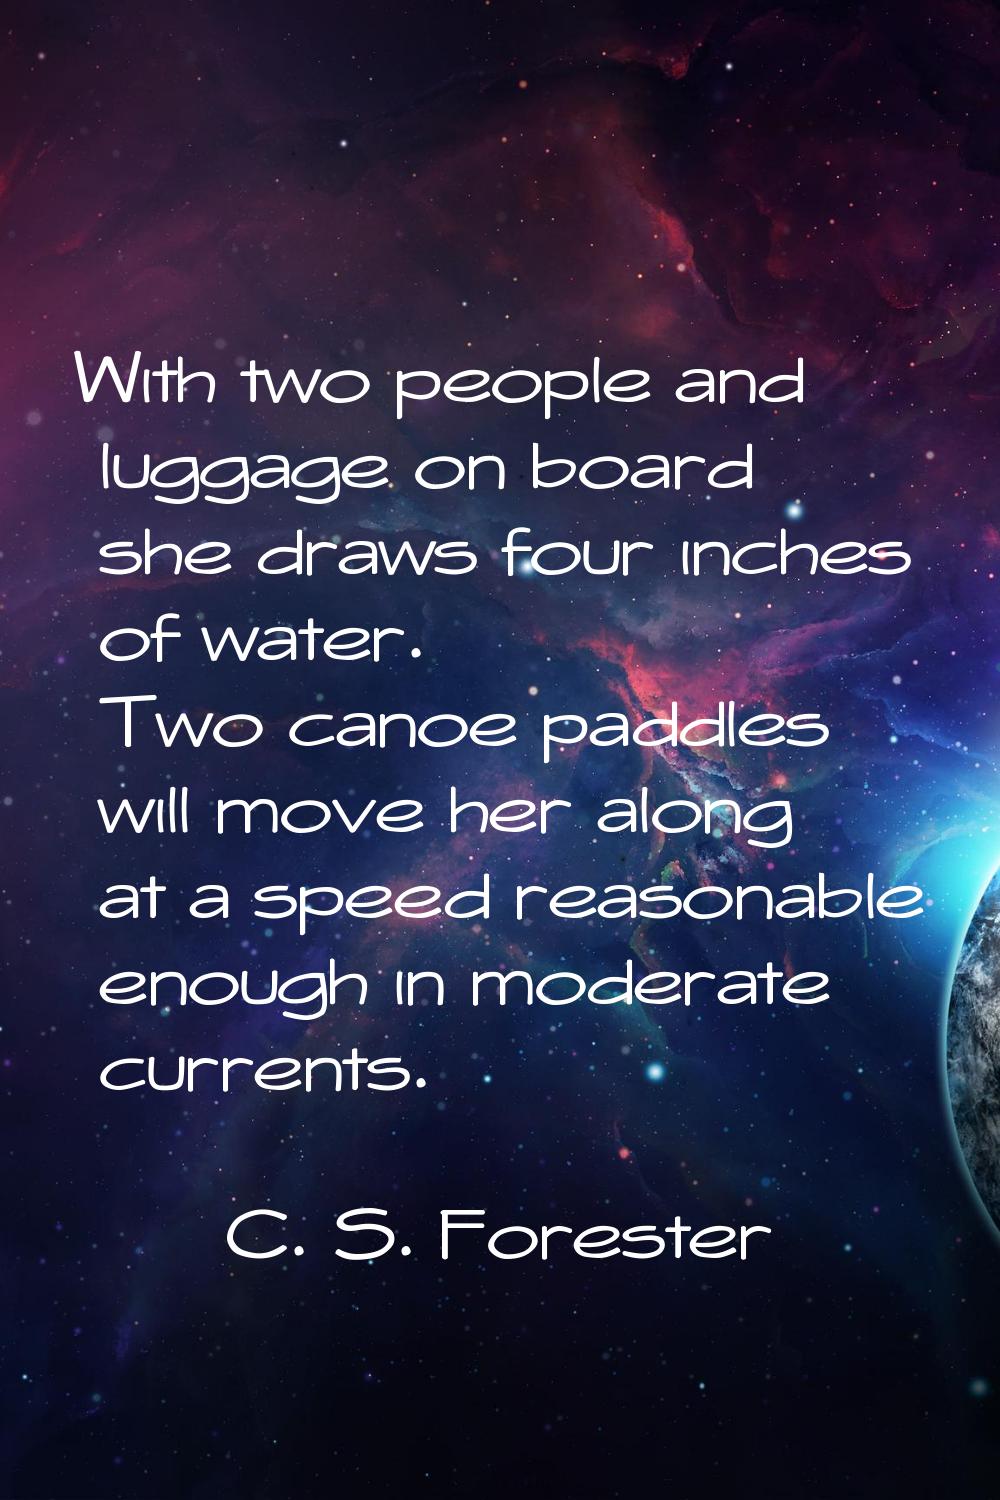 With two people and luggage on board she draws four inches of water. Two canoe paddles will move he